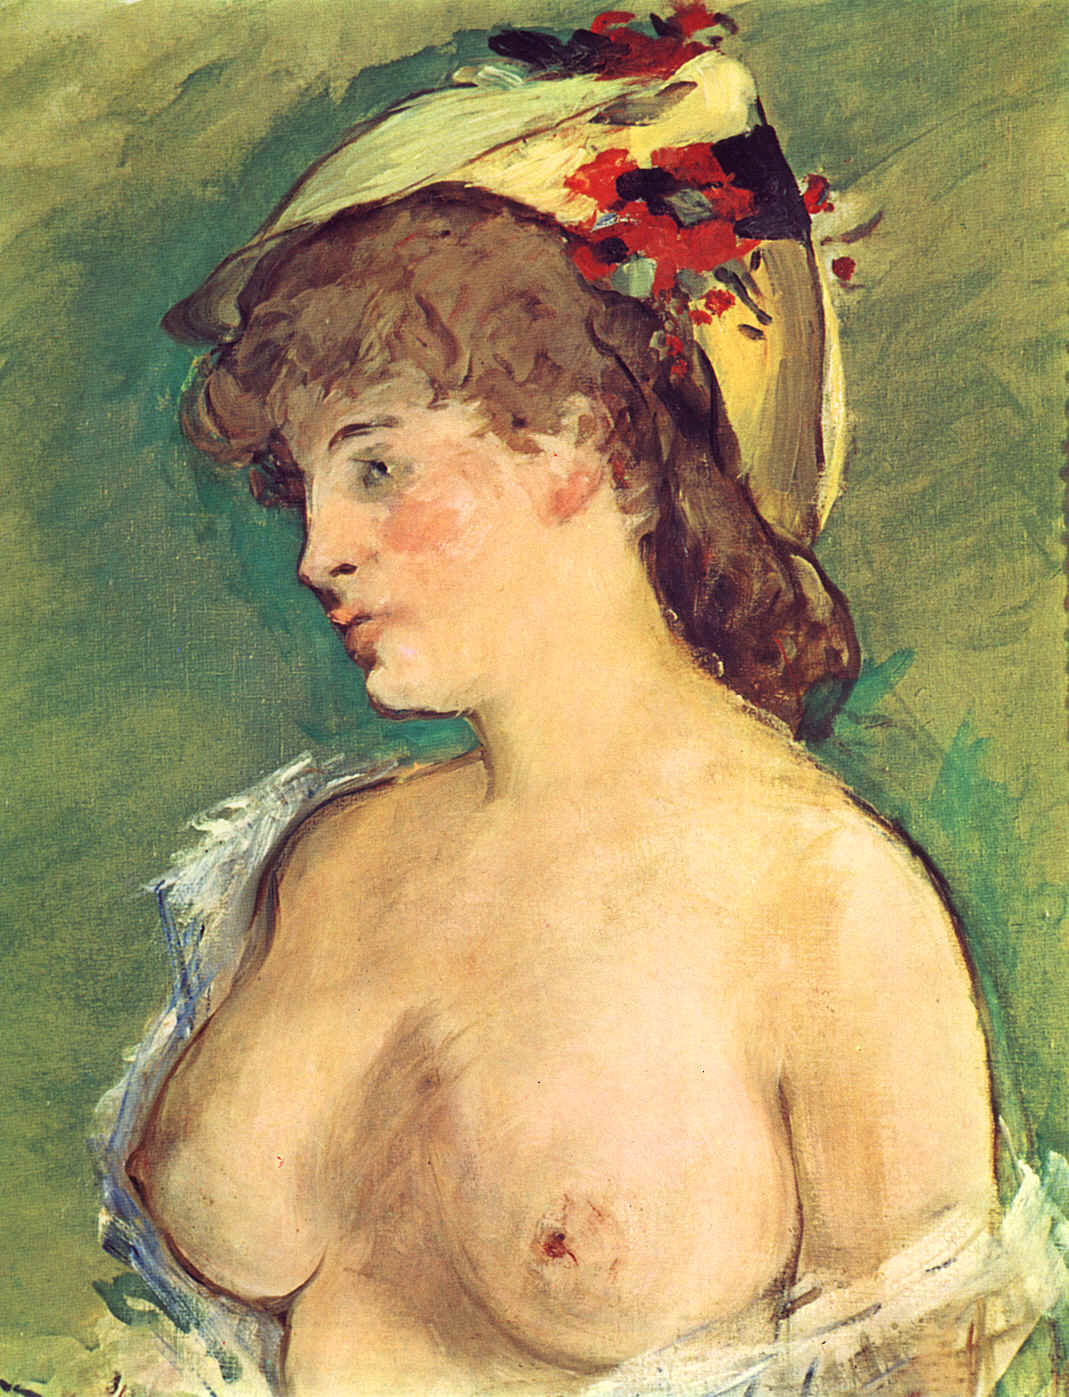 Blonde Woman with Bare Breasts／Manet